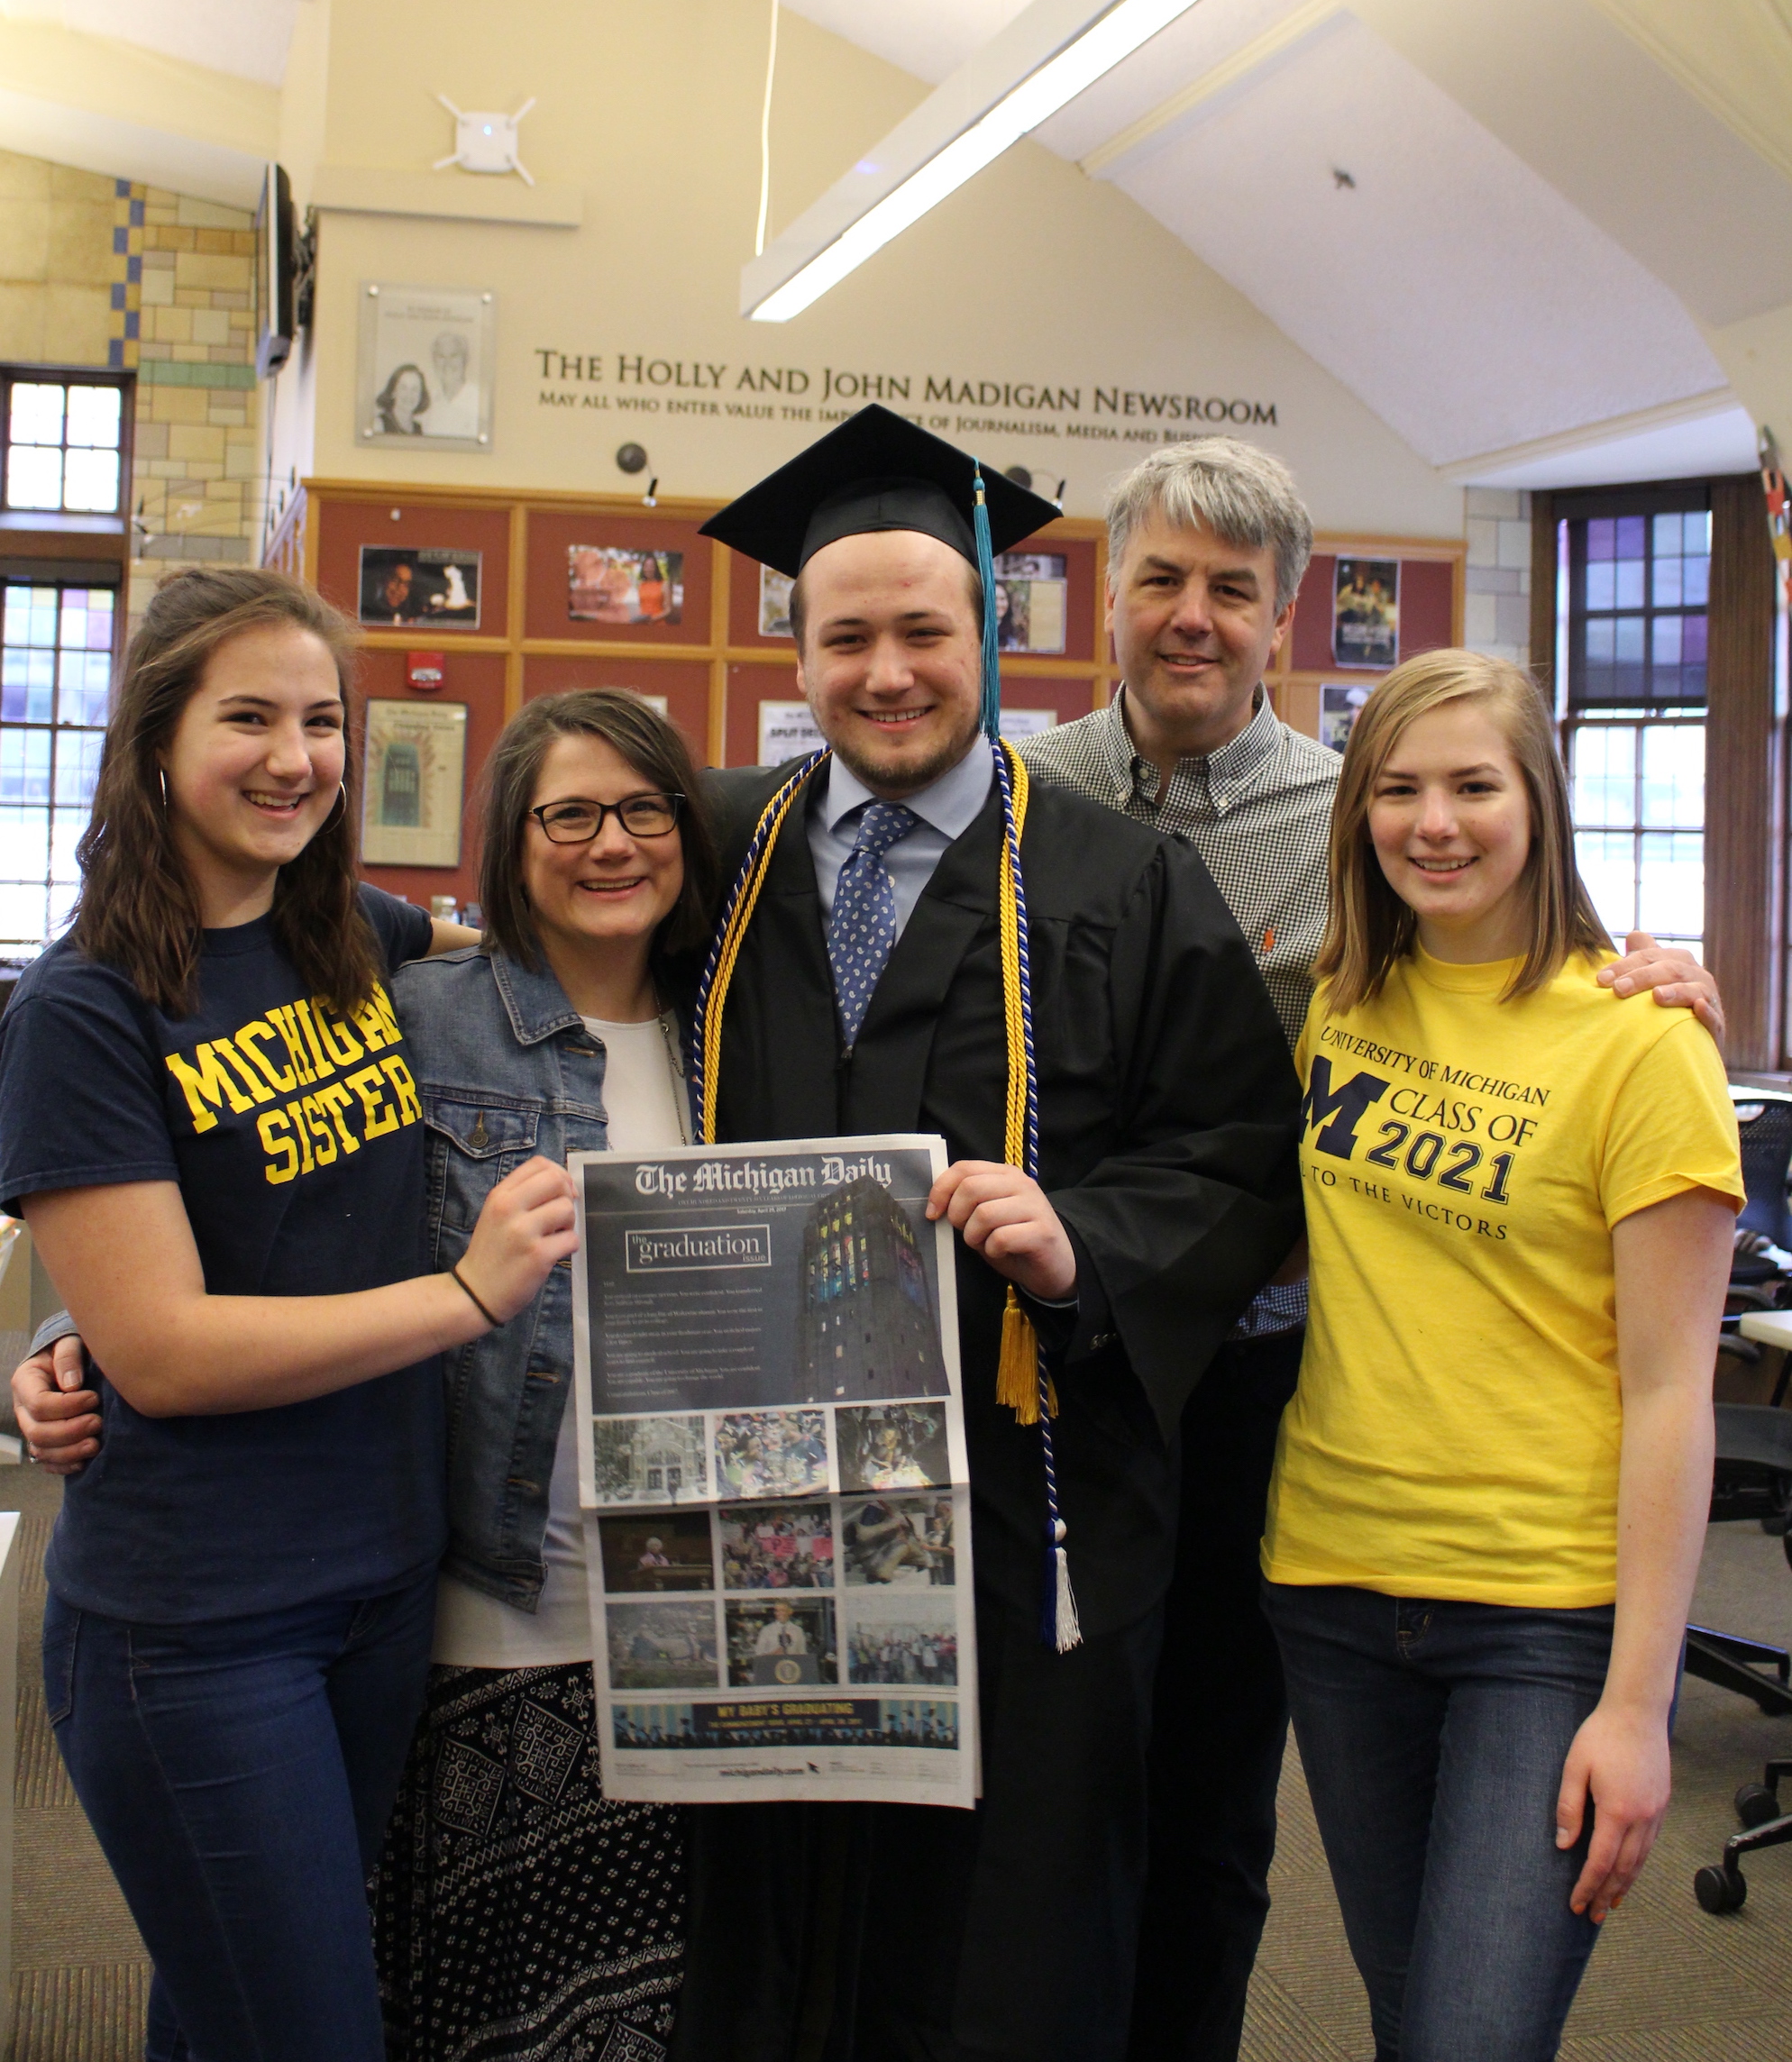 The Michigan Daily sports co-editor Max Bultman and his family celebrate his graduation